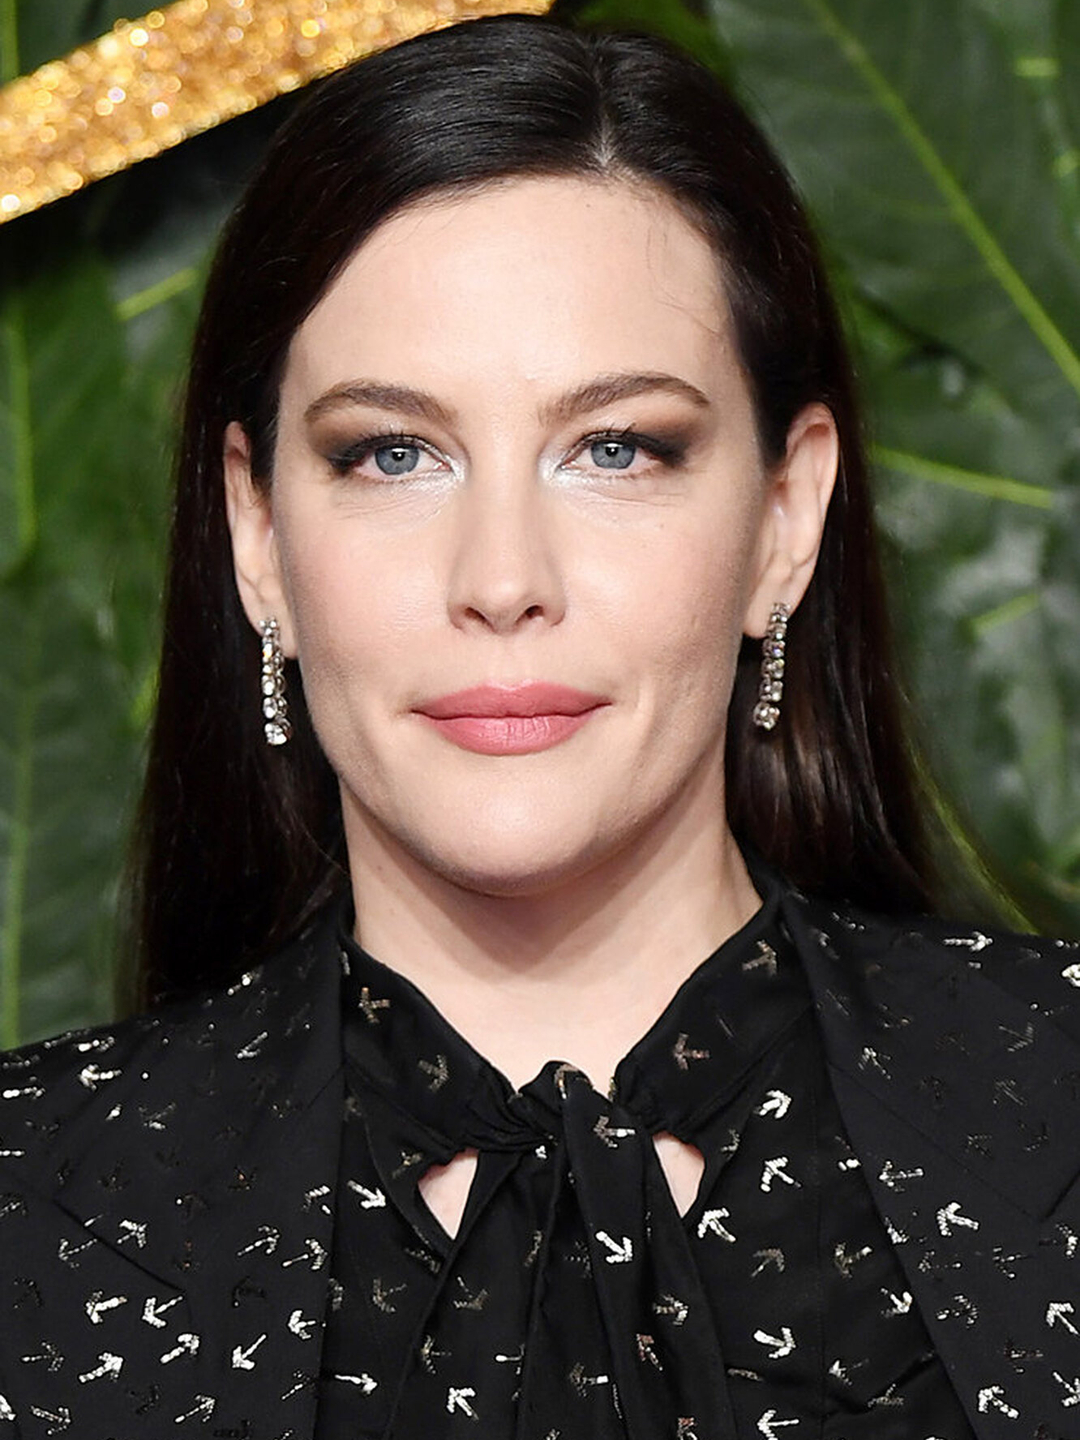 Liv Tyler unphotoshopped pictures